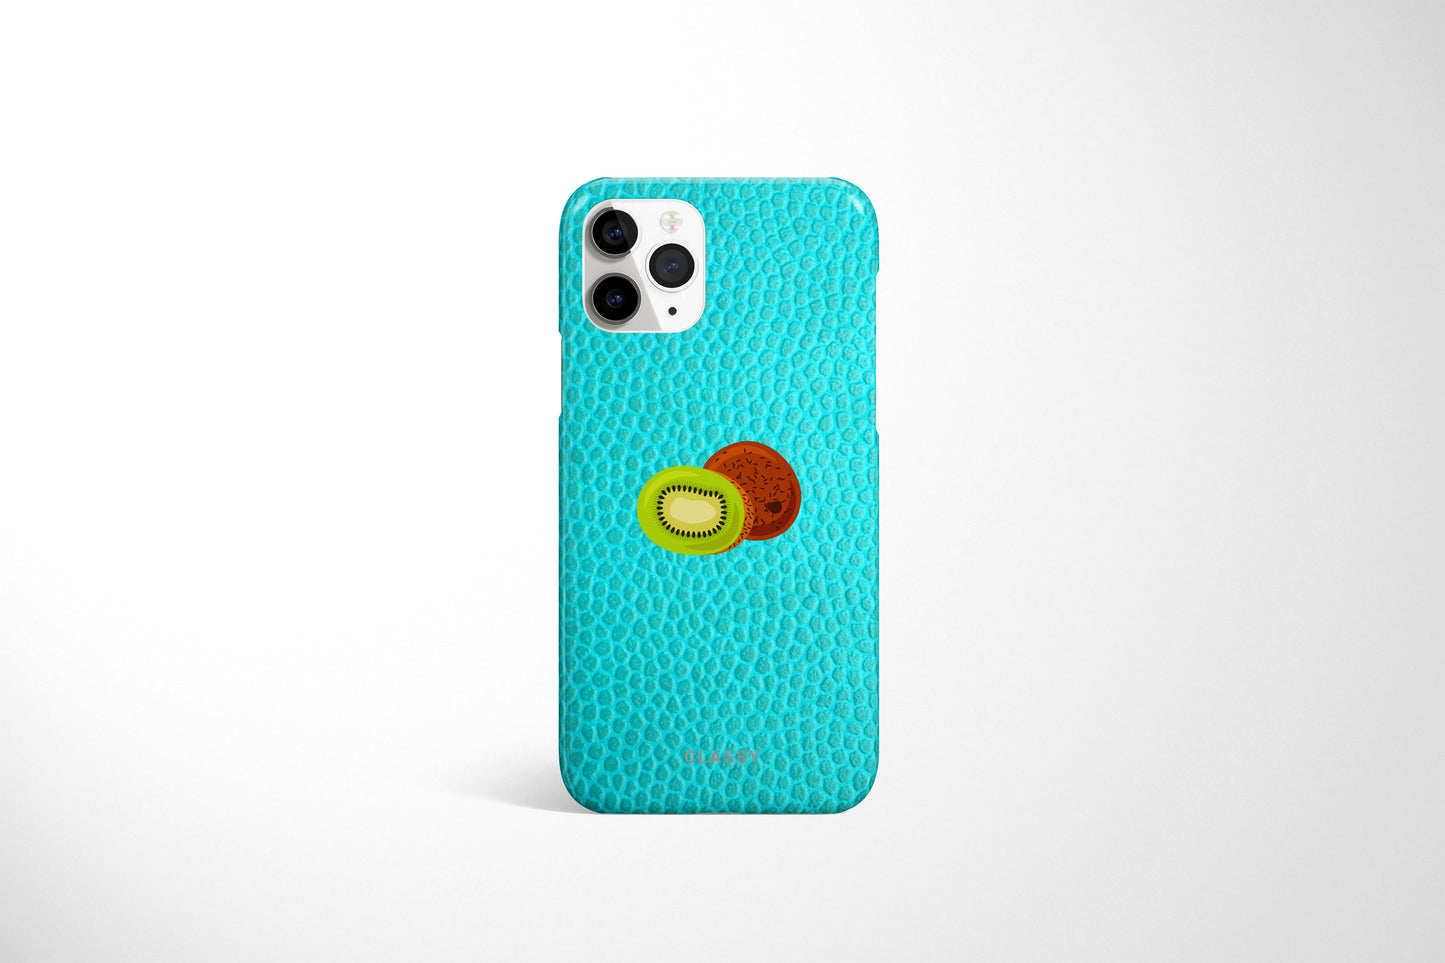 Kiwis Turquoise Snap Case - Classy Cases - Phone Case - iPhone 12 Pro Max - Glossy -